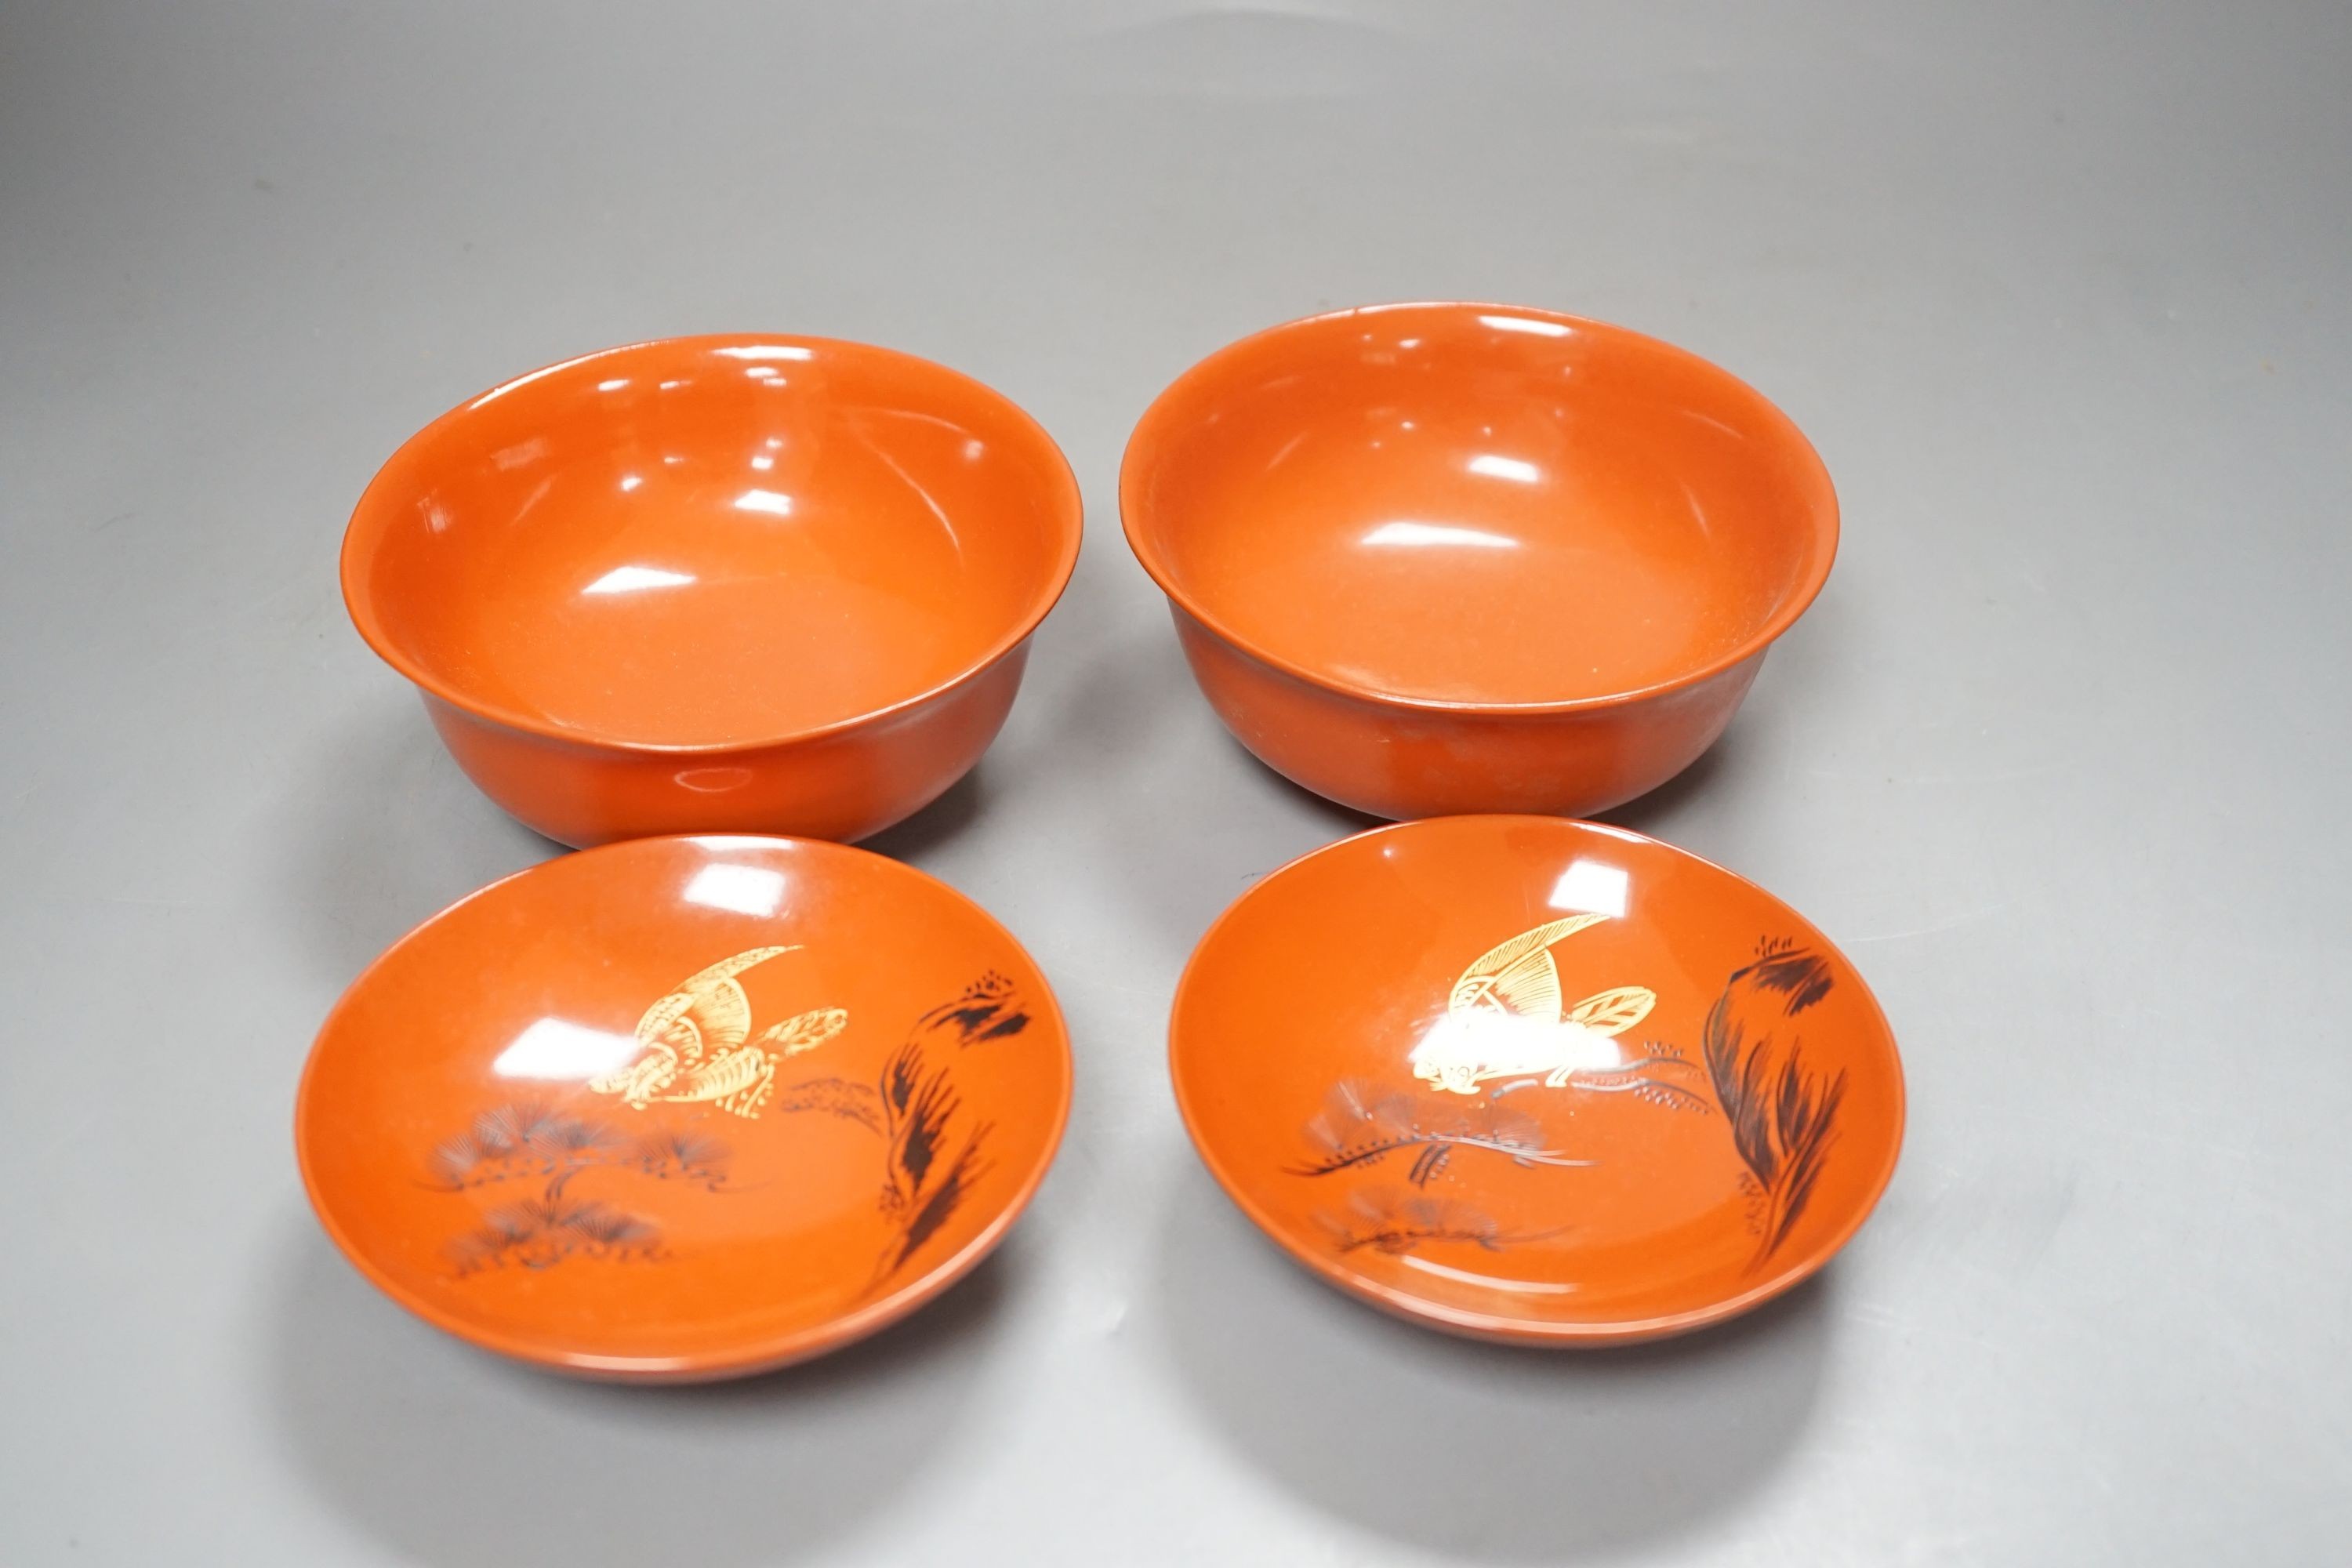 Two sets of Japanese lacquer bowls and covers, 20th century